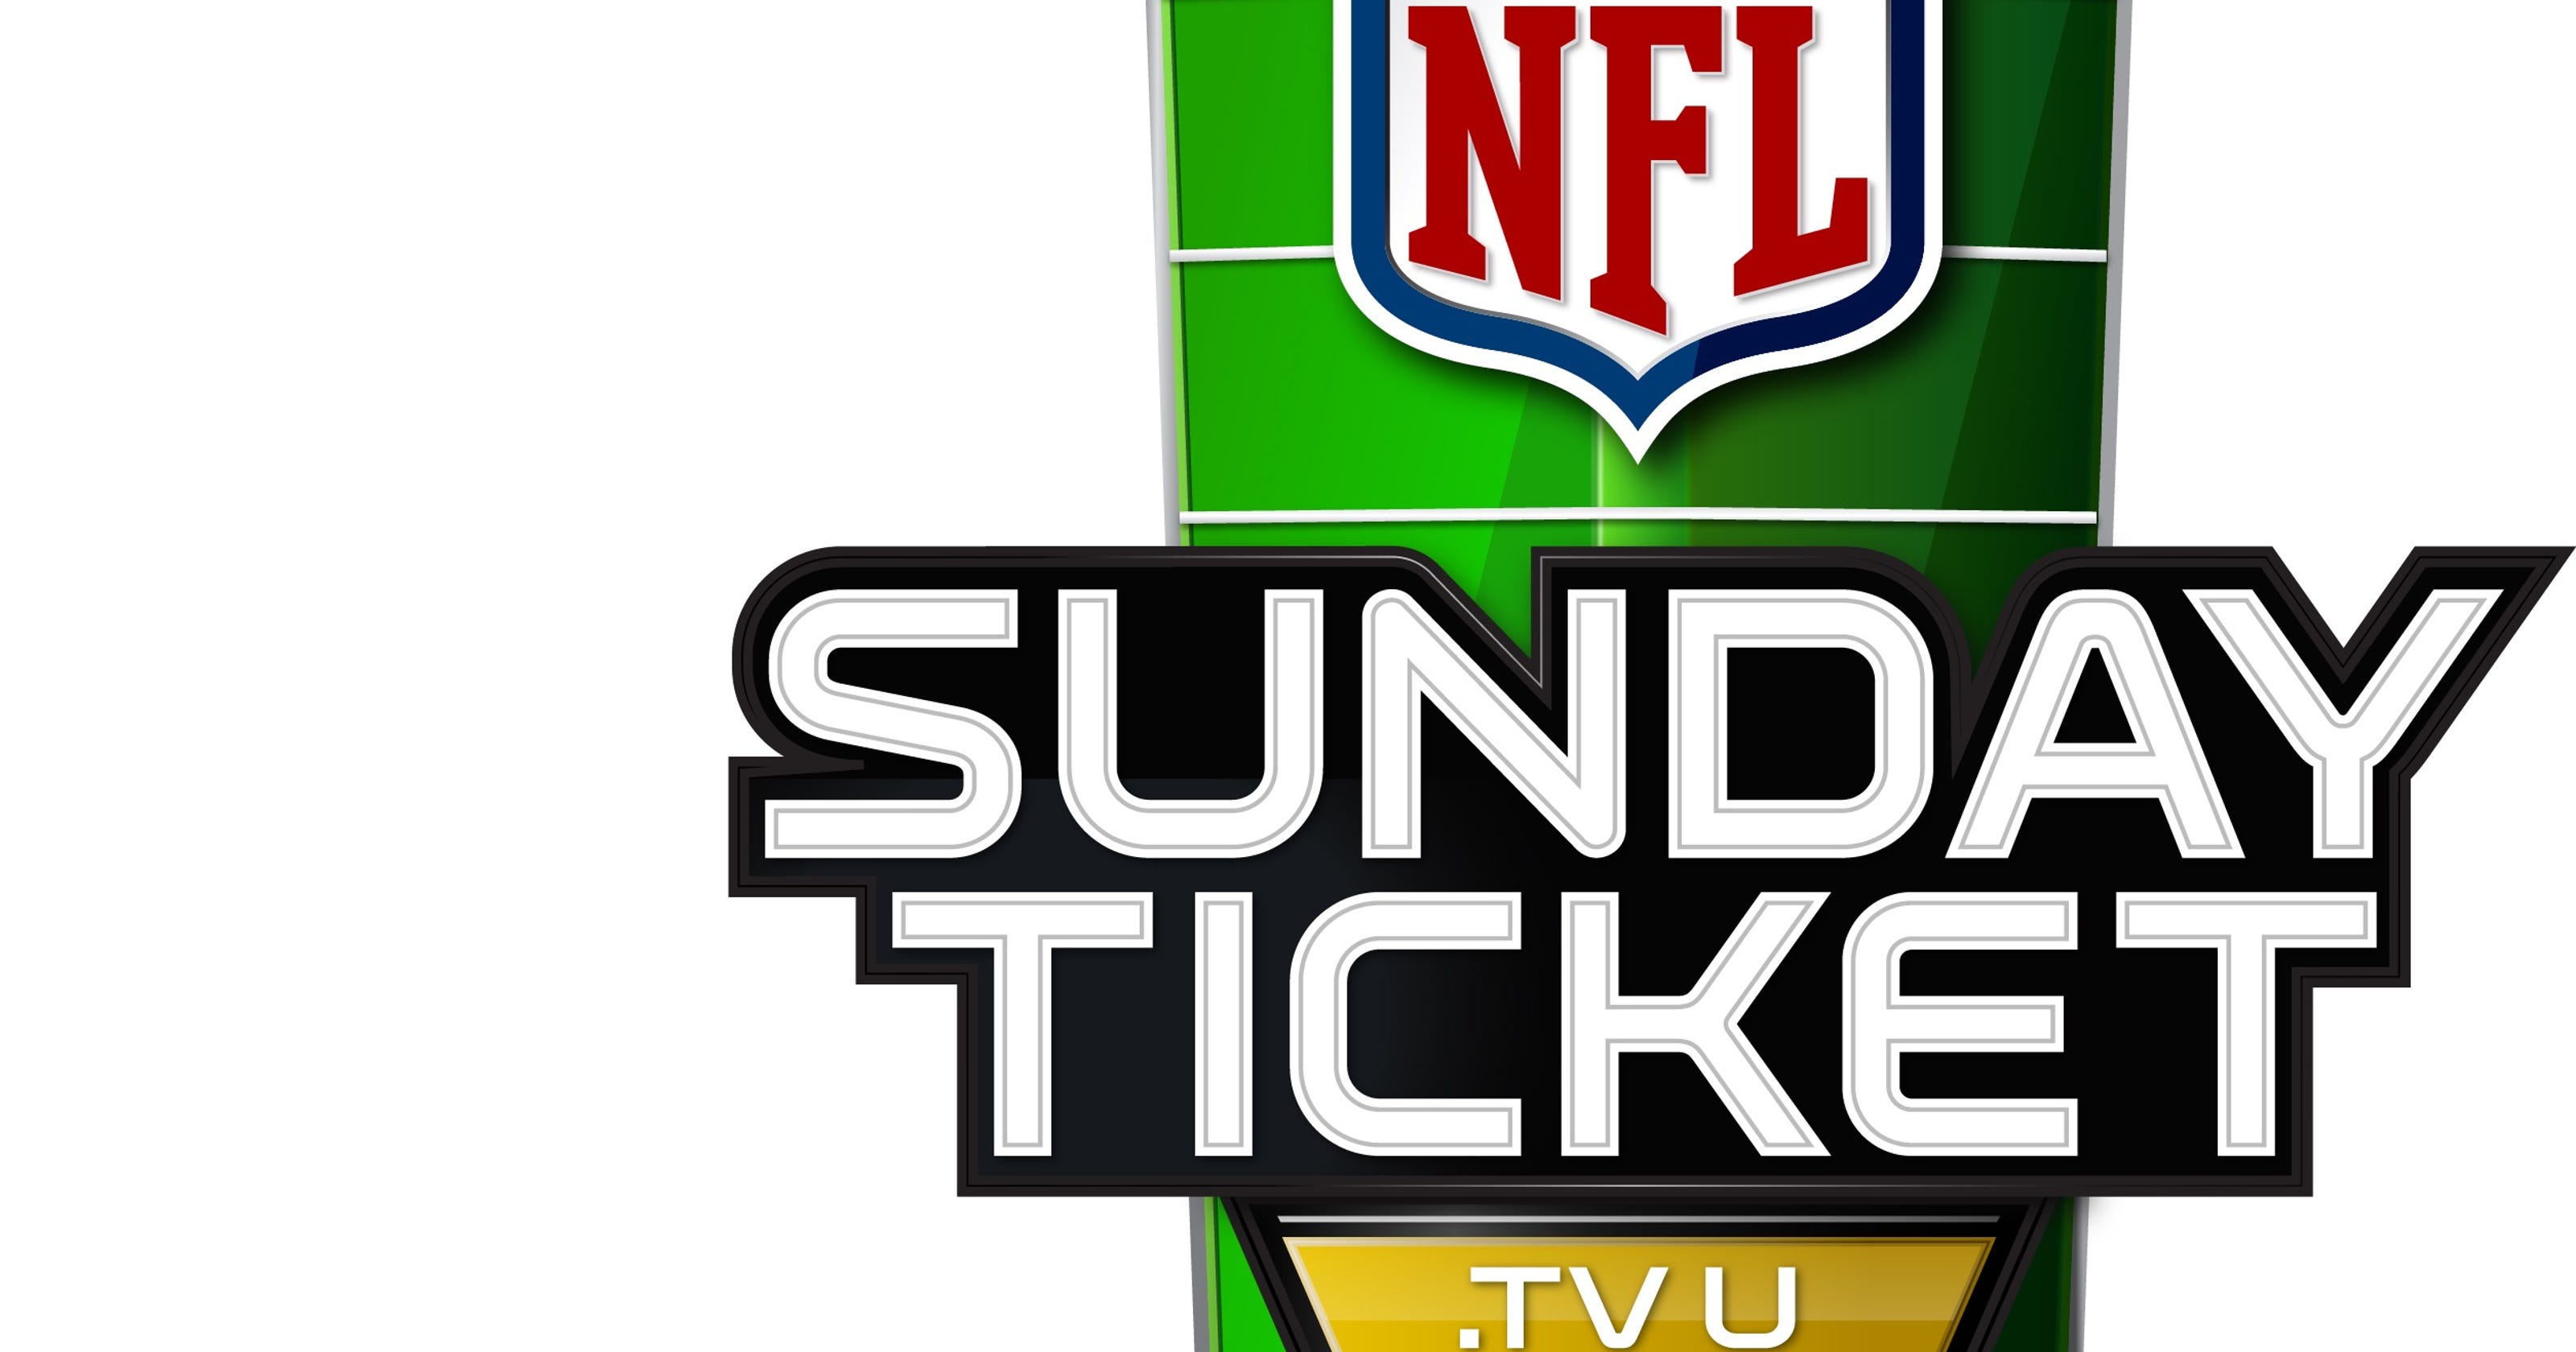 NFL Sunday Ticket prices increased by DirecTV for 2018